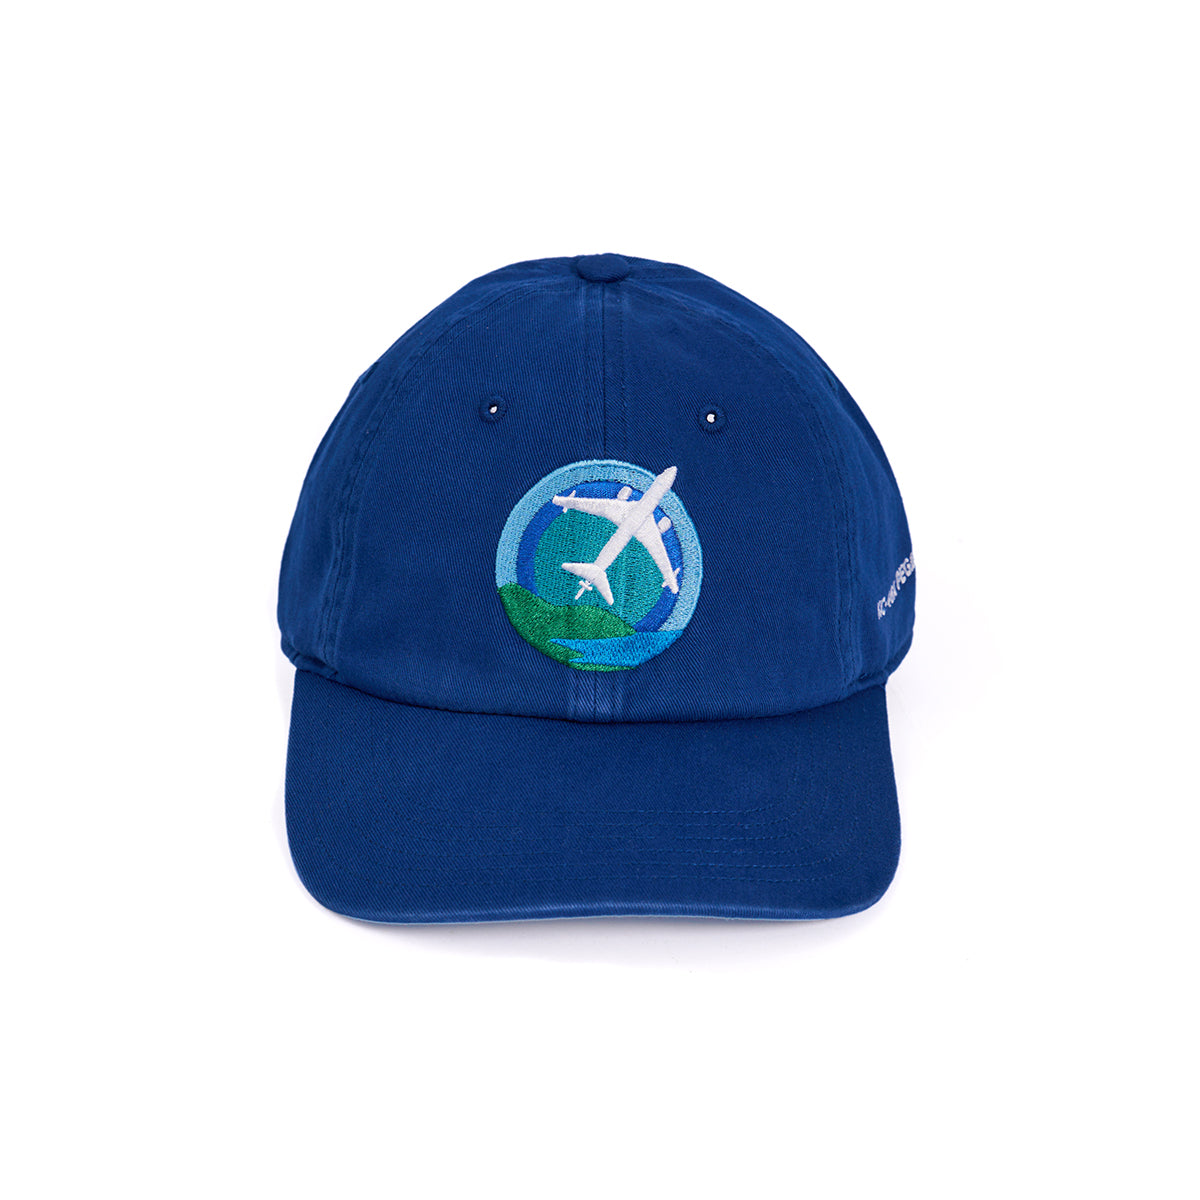 Skyward hat, featuring the iconic Boeing KC-46 Pegasus embroidered in a roundel design on the front.